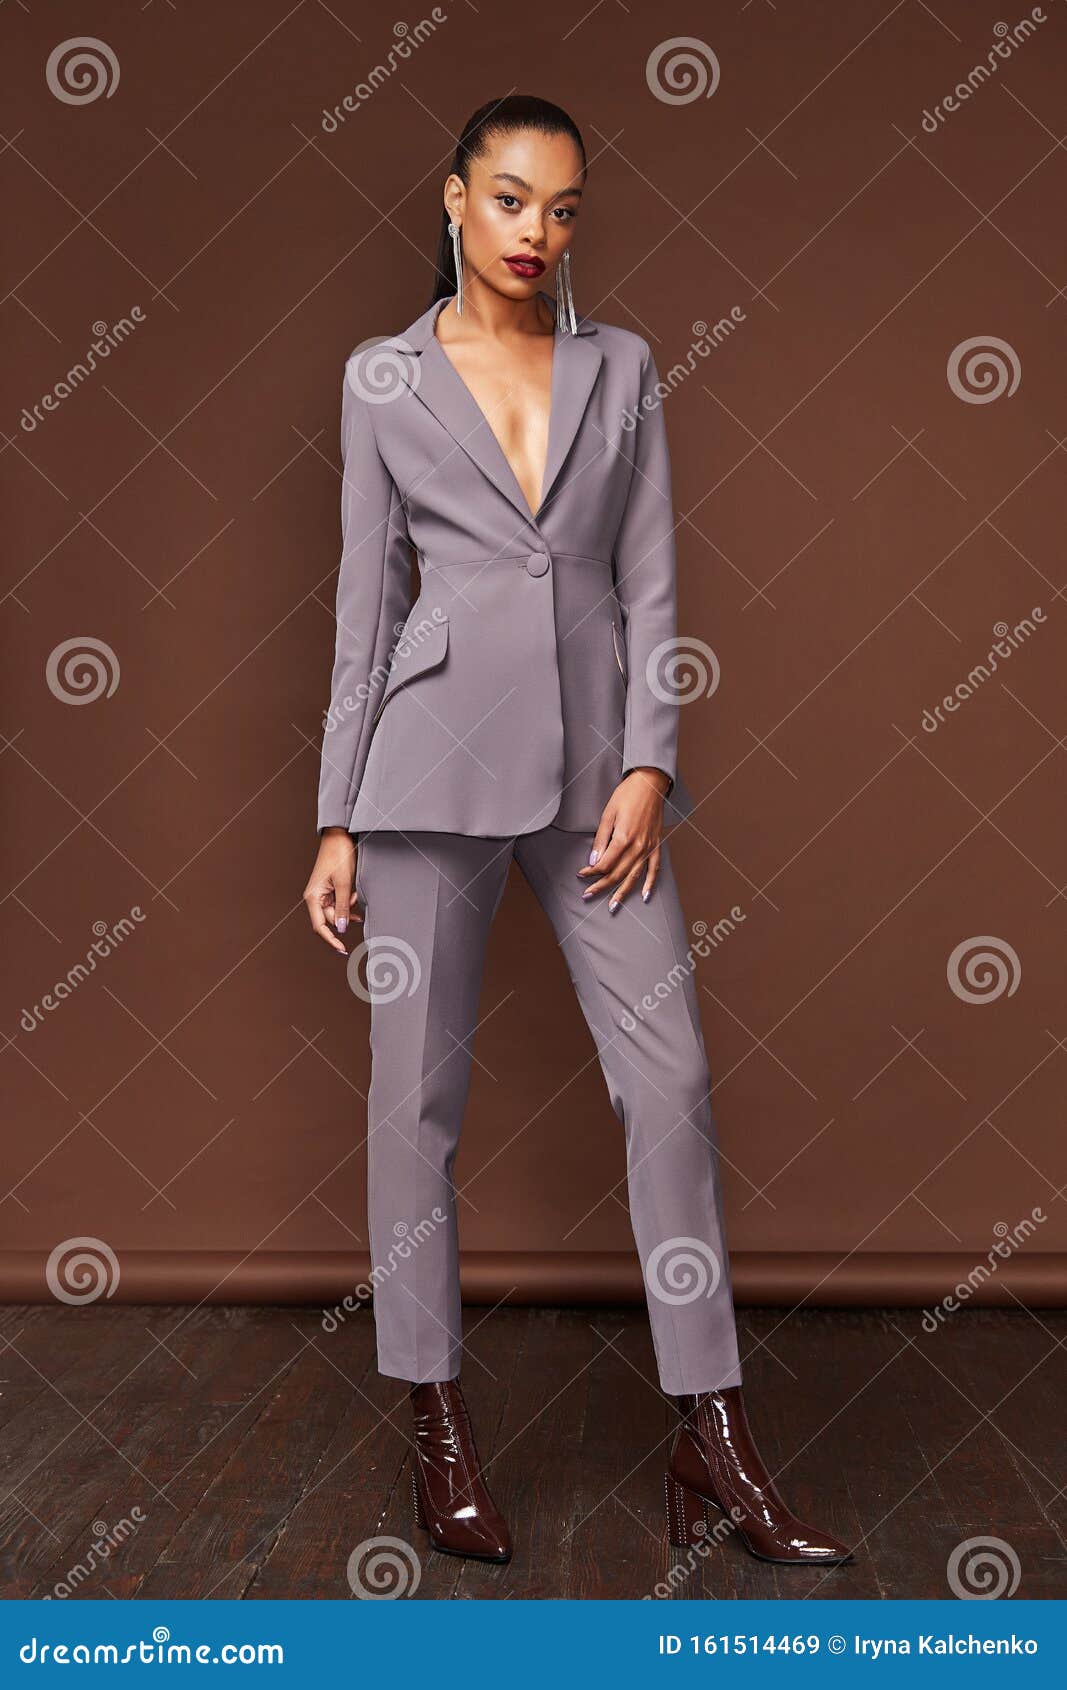 Beautiful Woman Fashion Glamour Model Brunette Hair Makeup Wear Suit  Trousers Jacket Clothes Office Dress Code Casual Party Stock Image - Image  of makeup, hair: 161514469